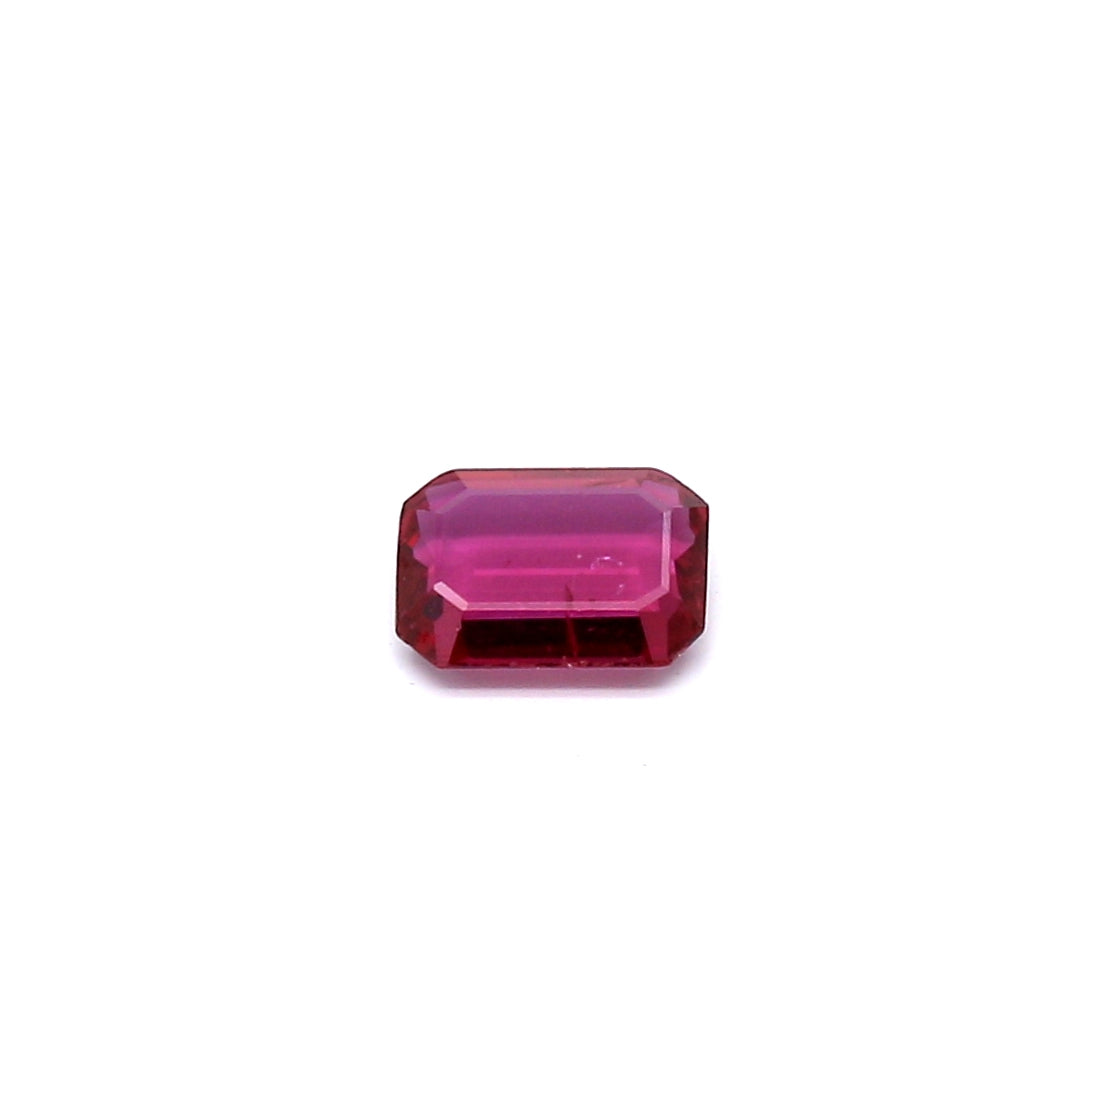 0.48ct Pinkish Red, Octagon Ruby, Heated, Thailand - 5.42 x 4.04 x 1.71mm